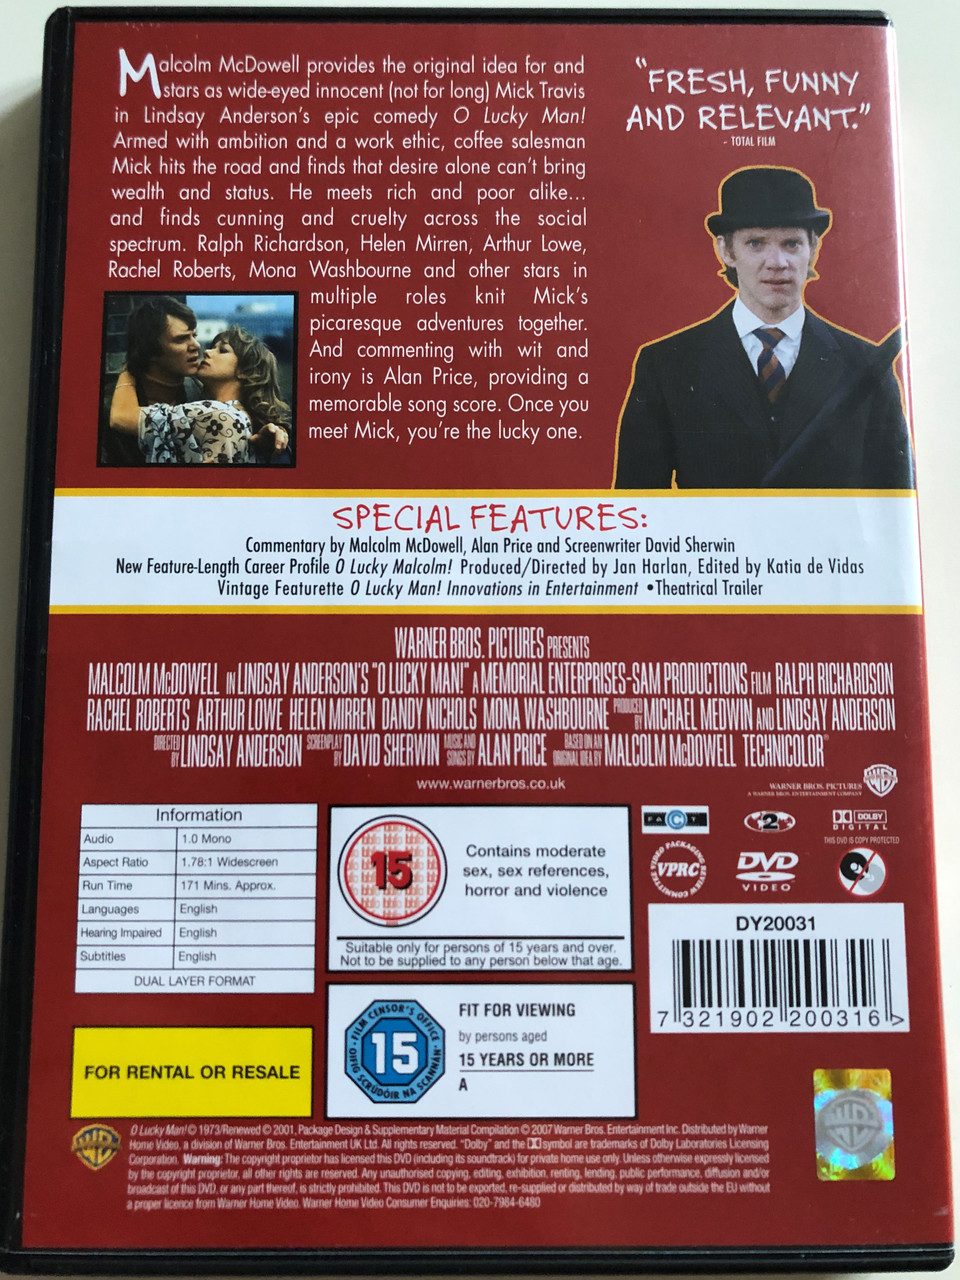 O Lucky Man! DVD 1973 / Directed by Lindsay Anderson / Starring: Malcolm  McDowell, Ralph Richardson ,Rachel Roberts, Arthur Lowe, Helen Mirren /  Two-Disc Special Edition - bibleinmylanguage